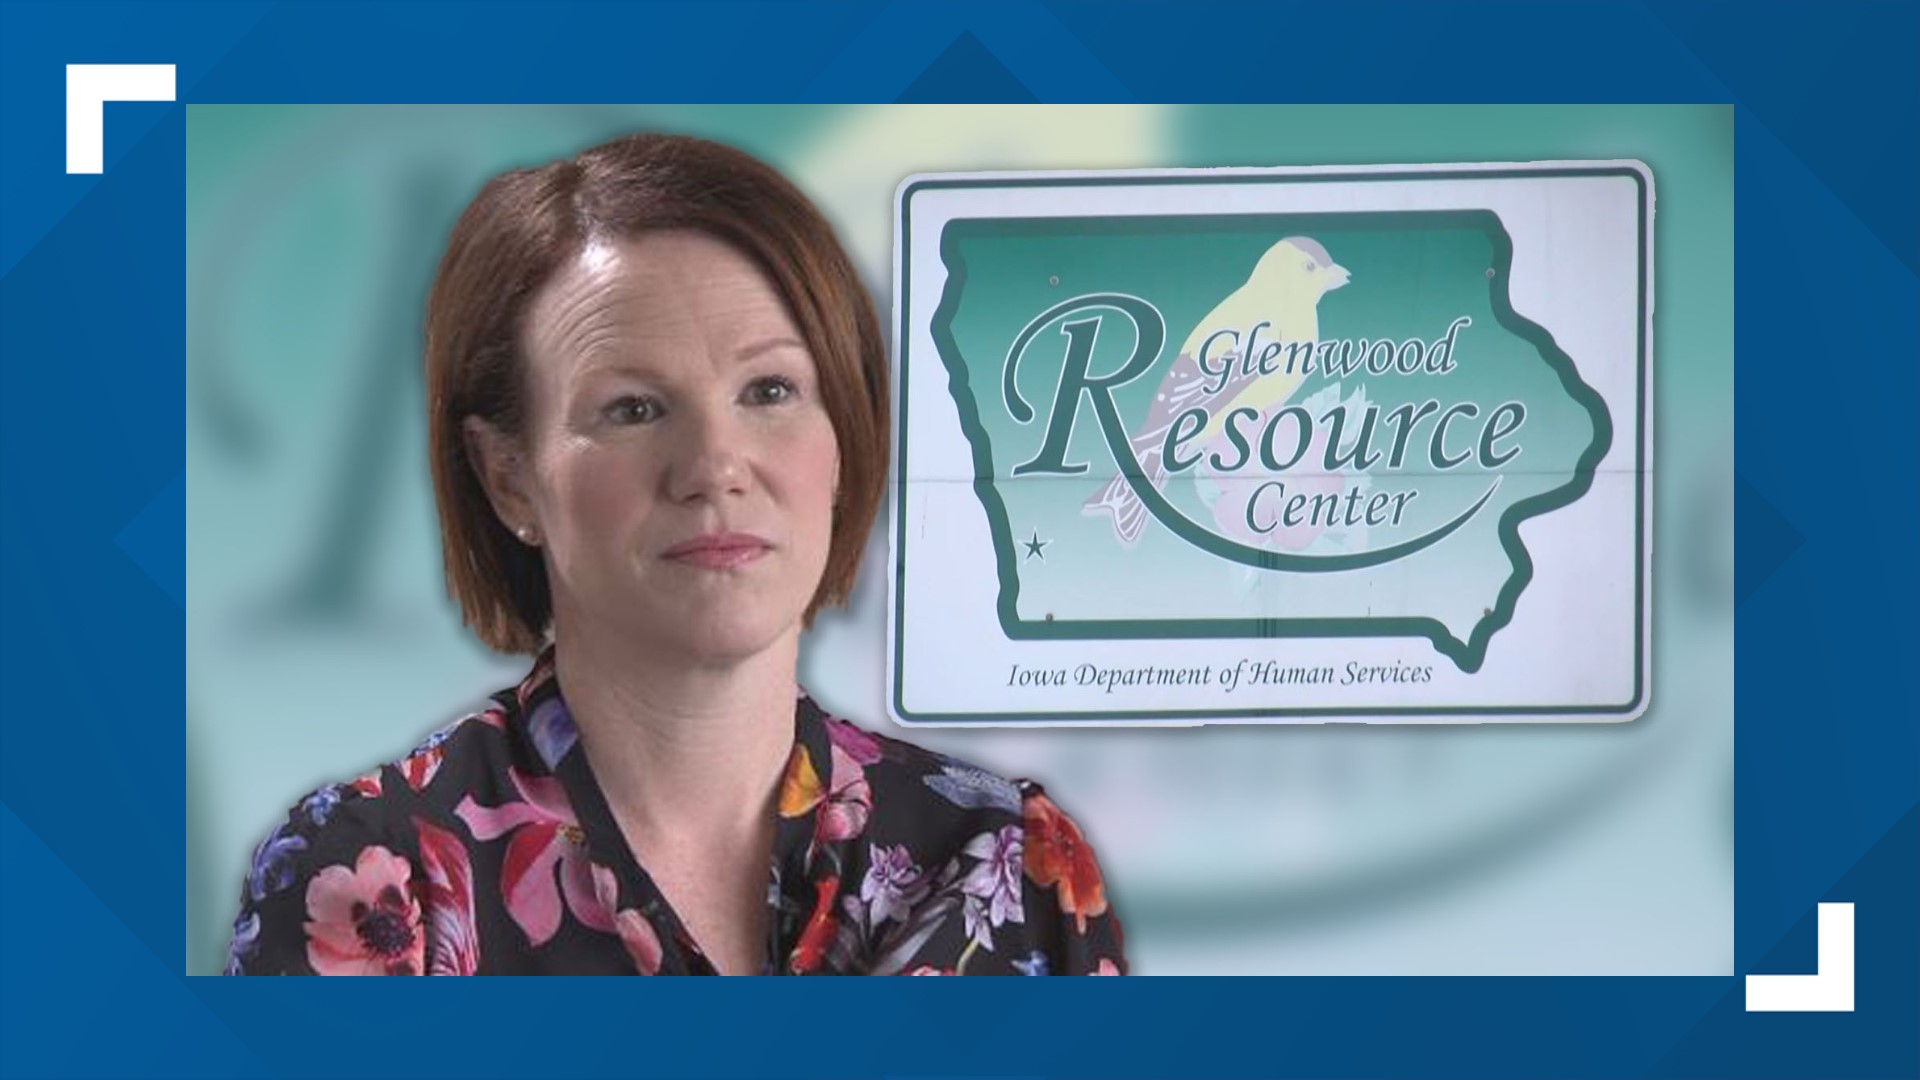 Local 5's Rachel Droze sat down with Department of Human Services Director Kelly Garcia to discuss the Glenwood Resource Center.